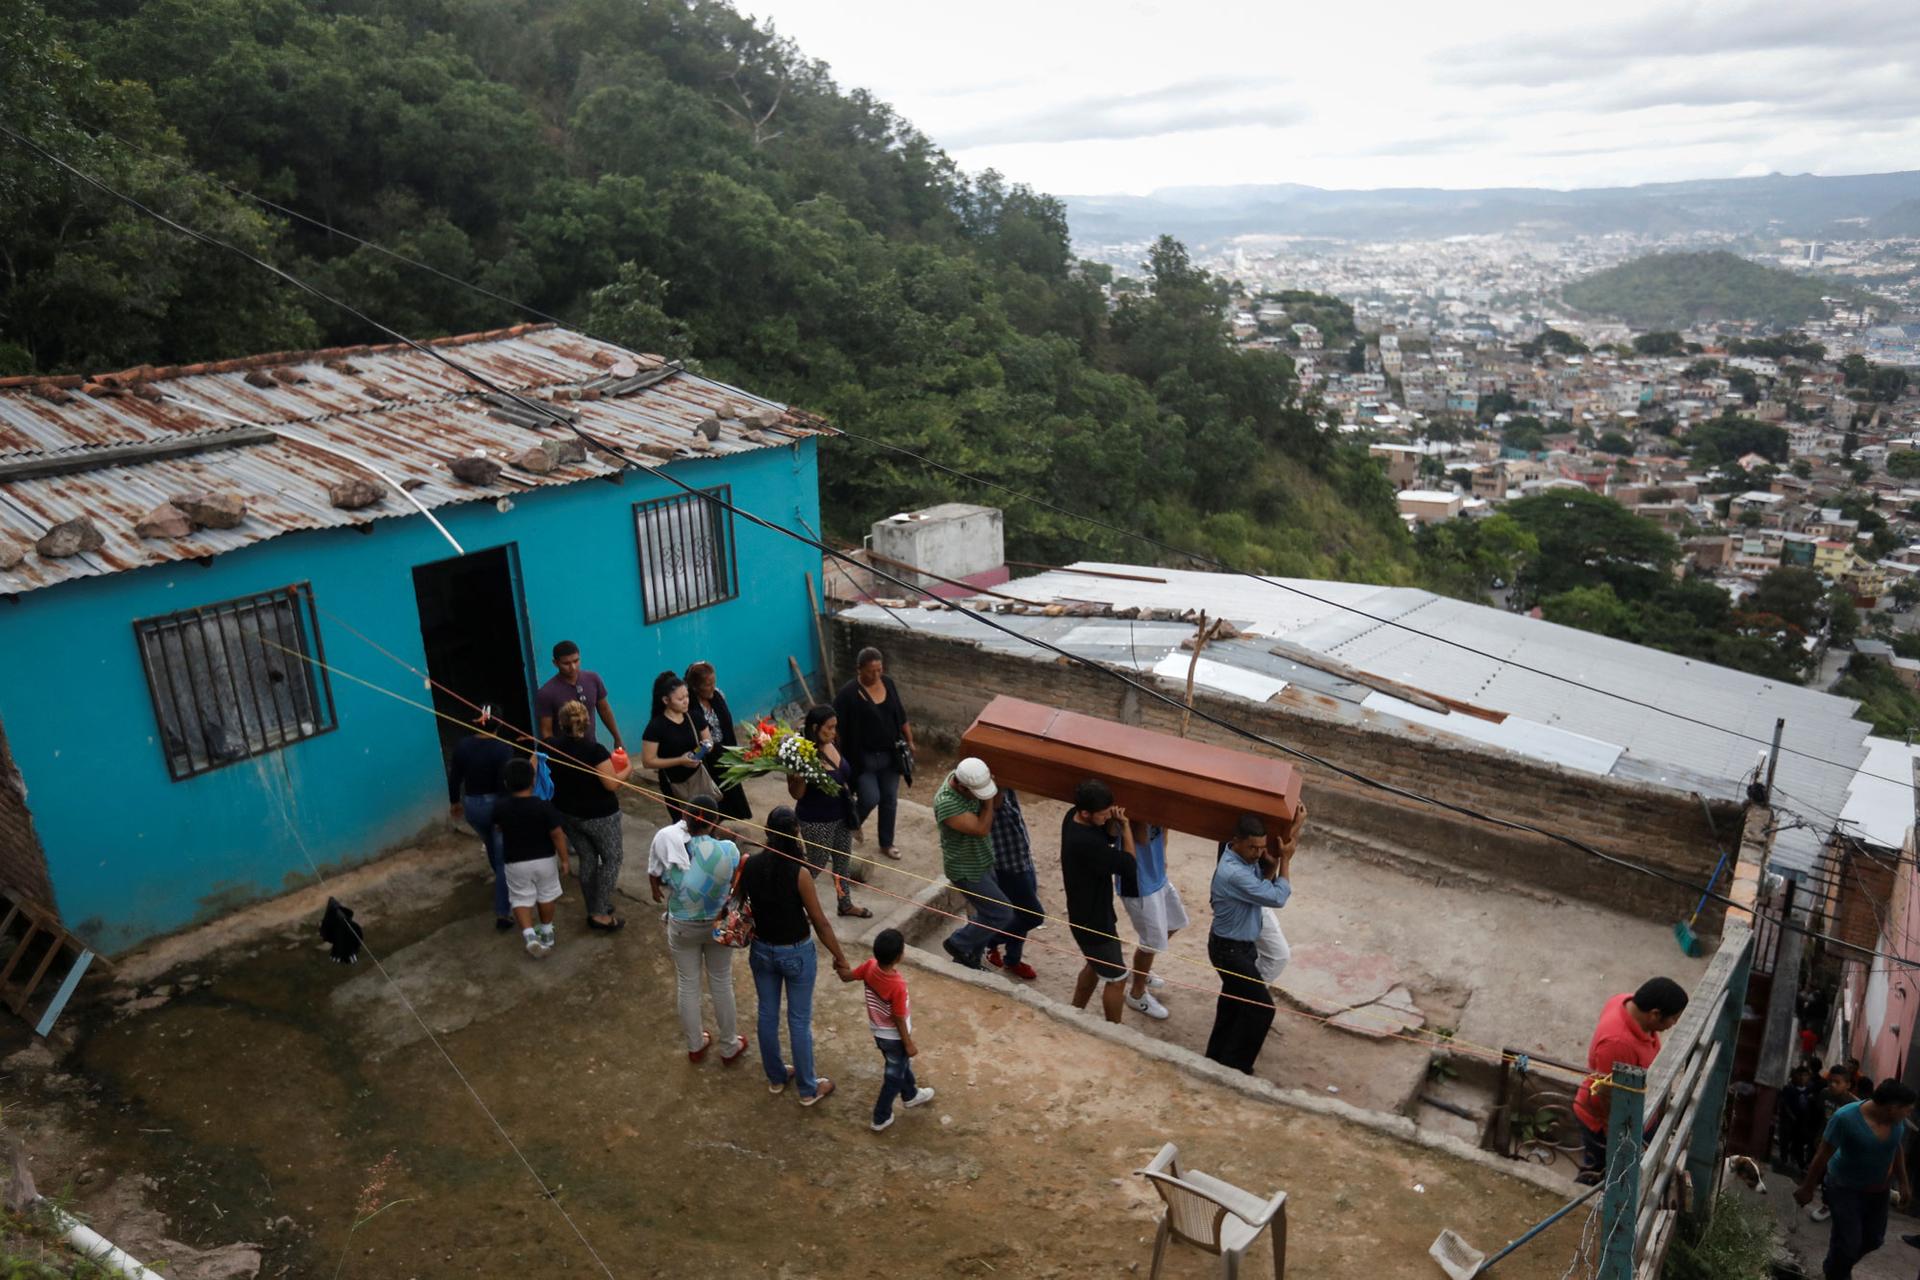 Relatives and friends of Ronald Blanco are shown walking out of a blue house on a hill overlooking Tegucigalpa, carrying his coffin.